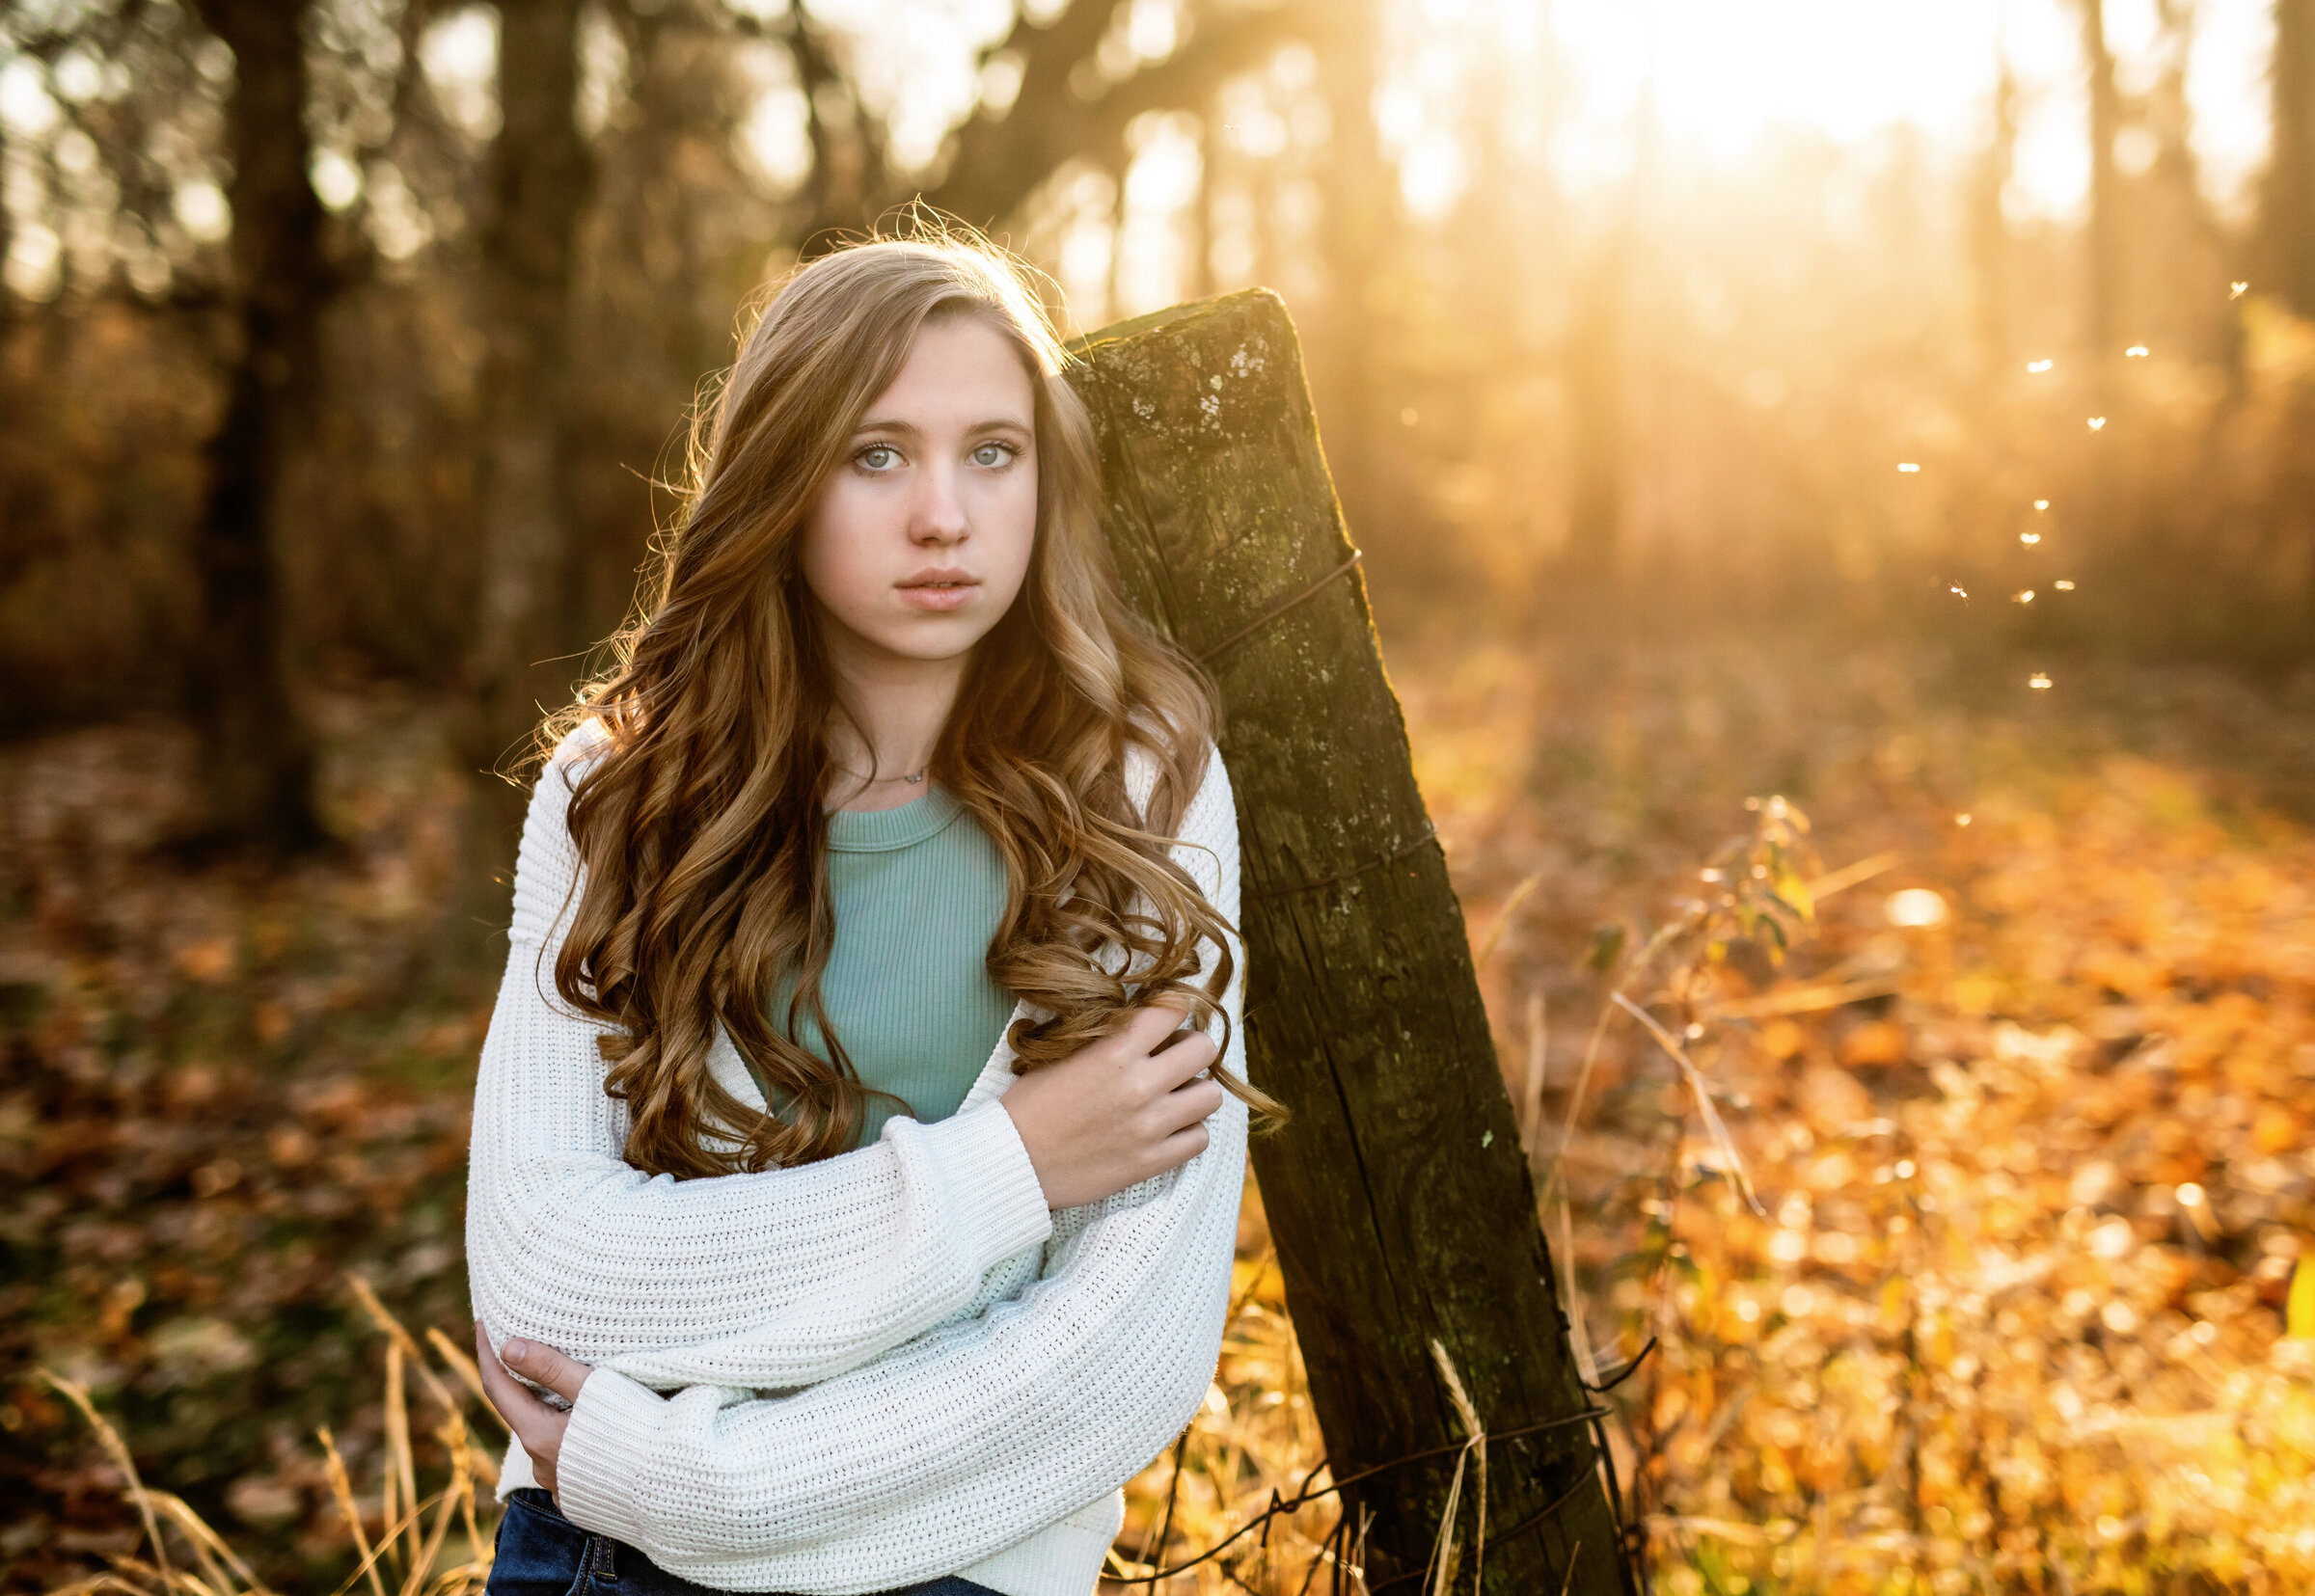 Teen girl standing against old wood post in woods while crossing her arms